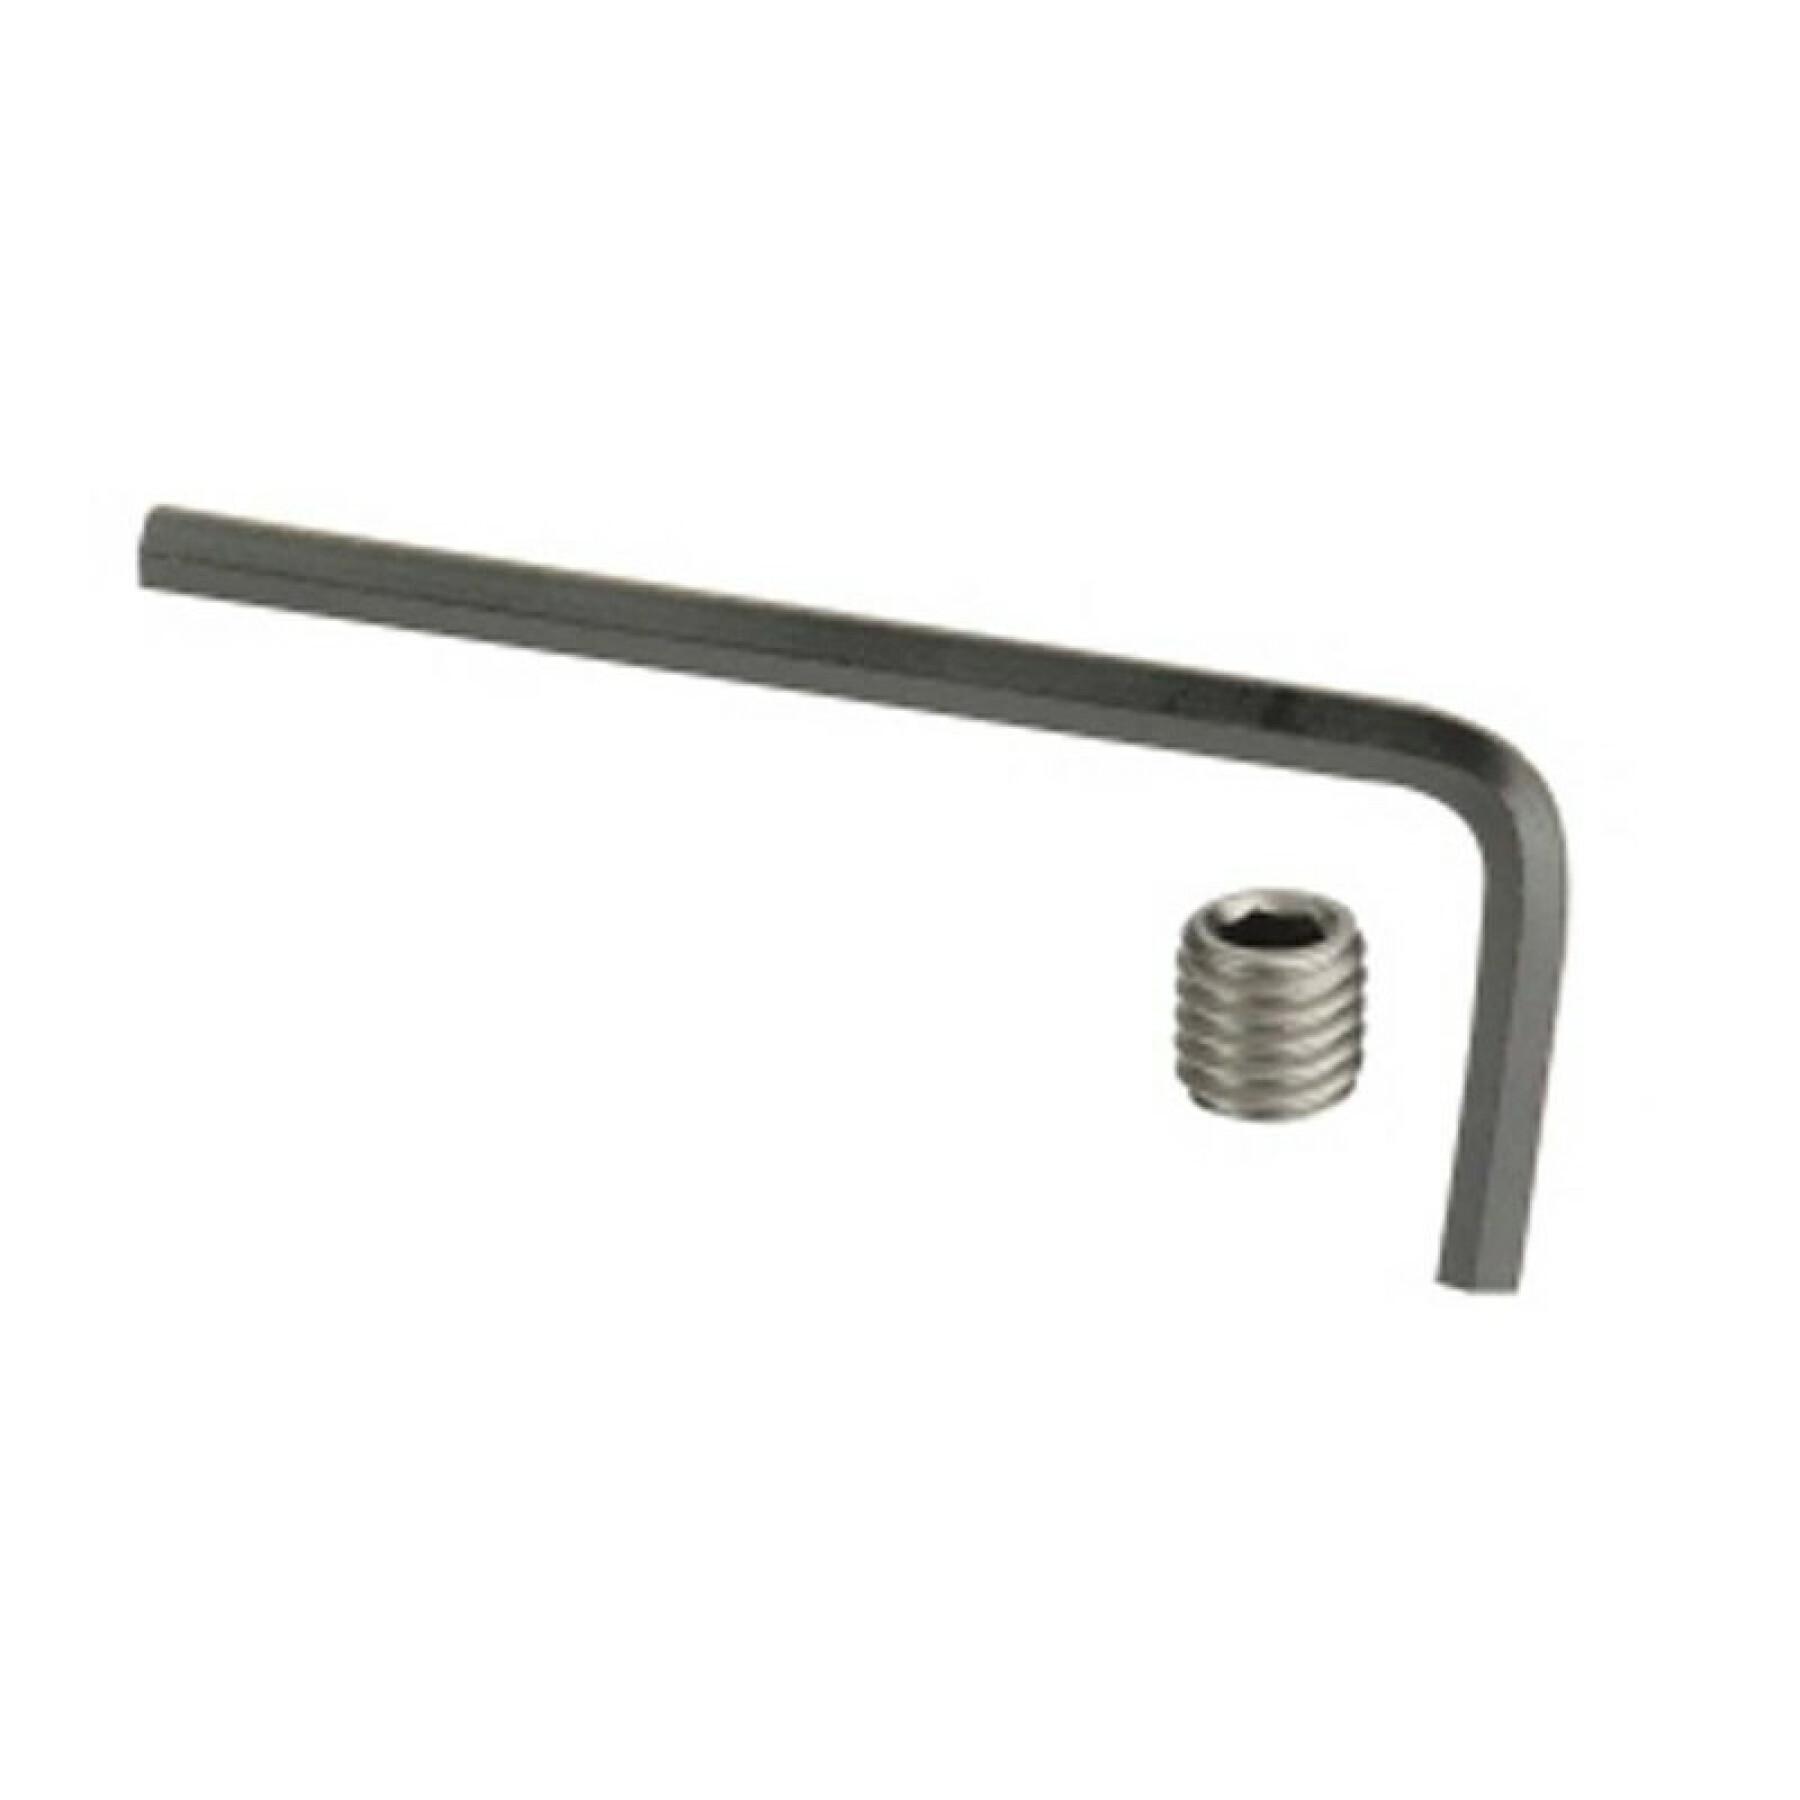 Spike wrench for horse 6 sides Vaillant